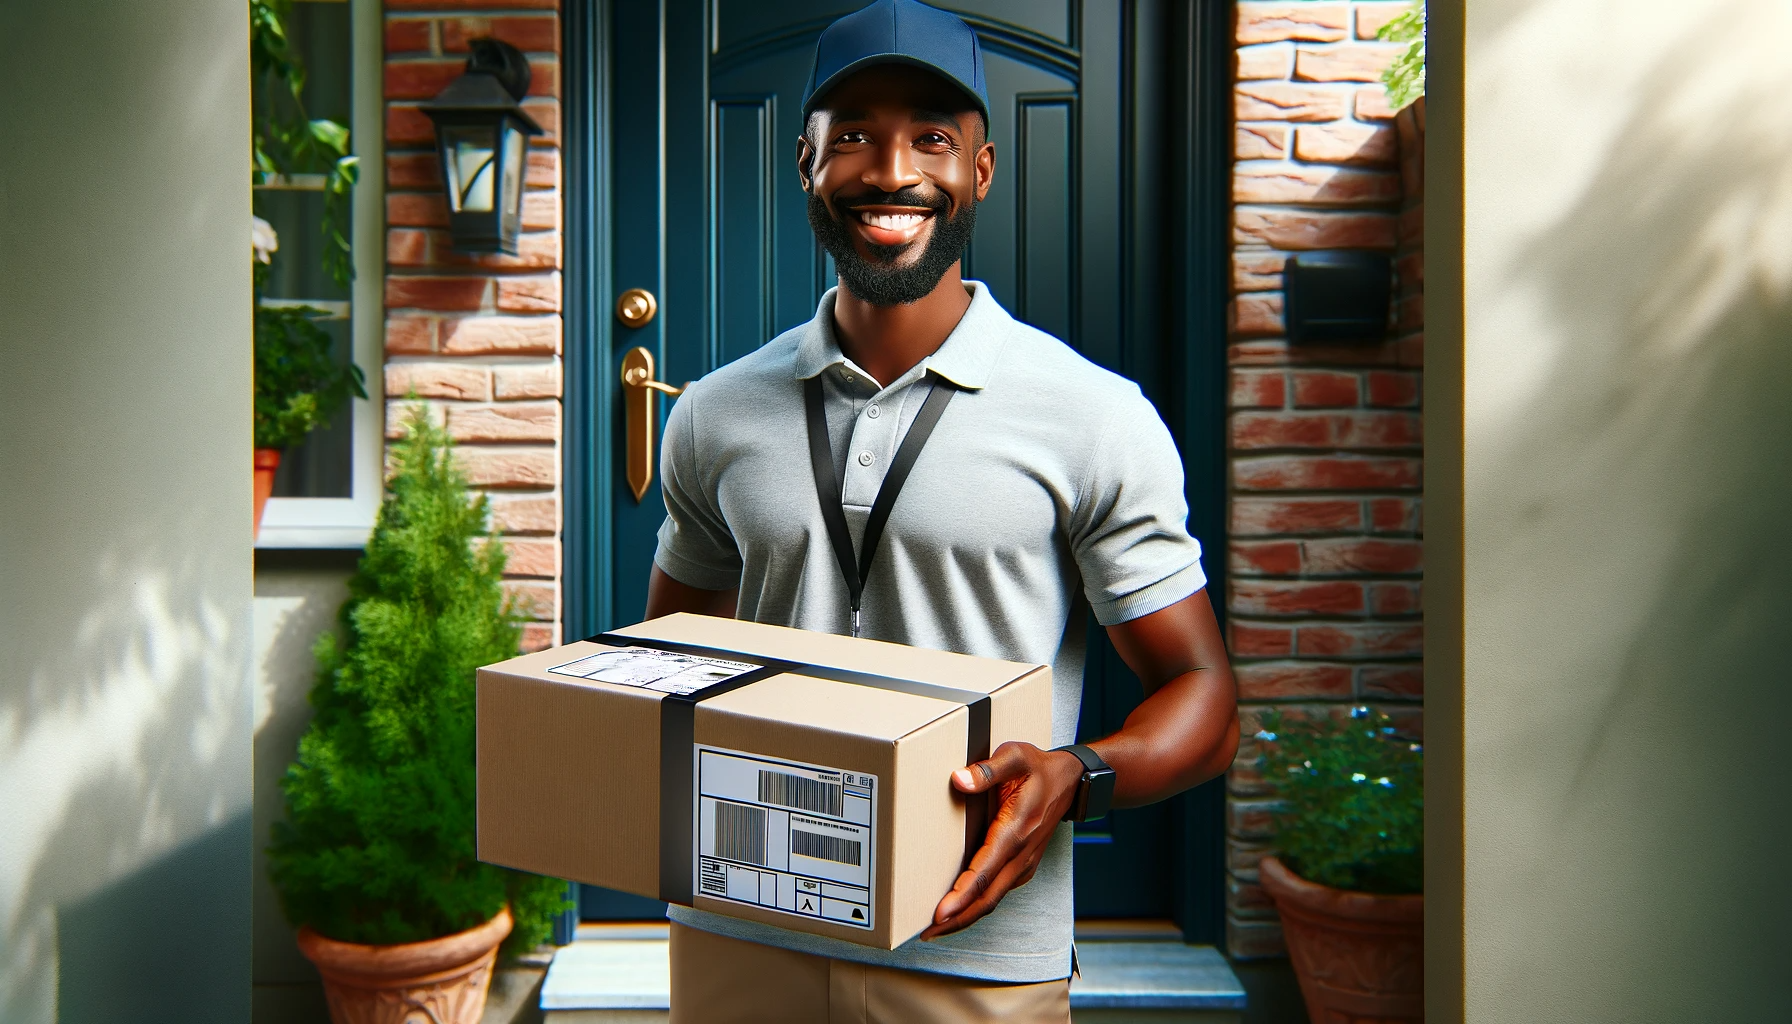 DALL·E 2023-11-29 03.17.51 - Create a highly detailed and realistic image of a happy delivery man, a Black male in his mid-thirties, handing out a package at a residential doorste